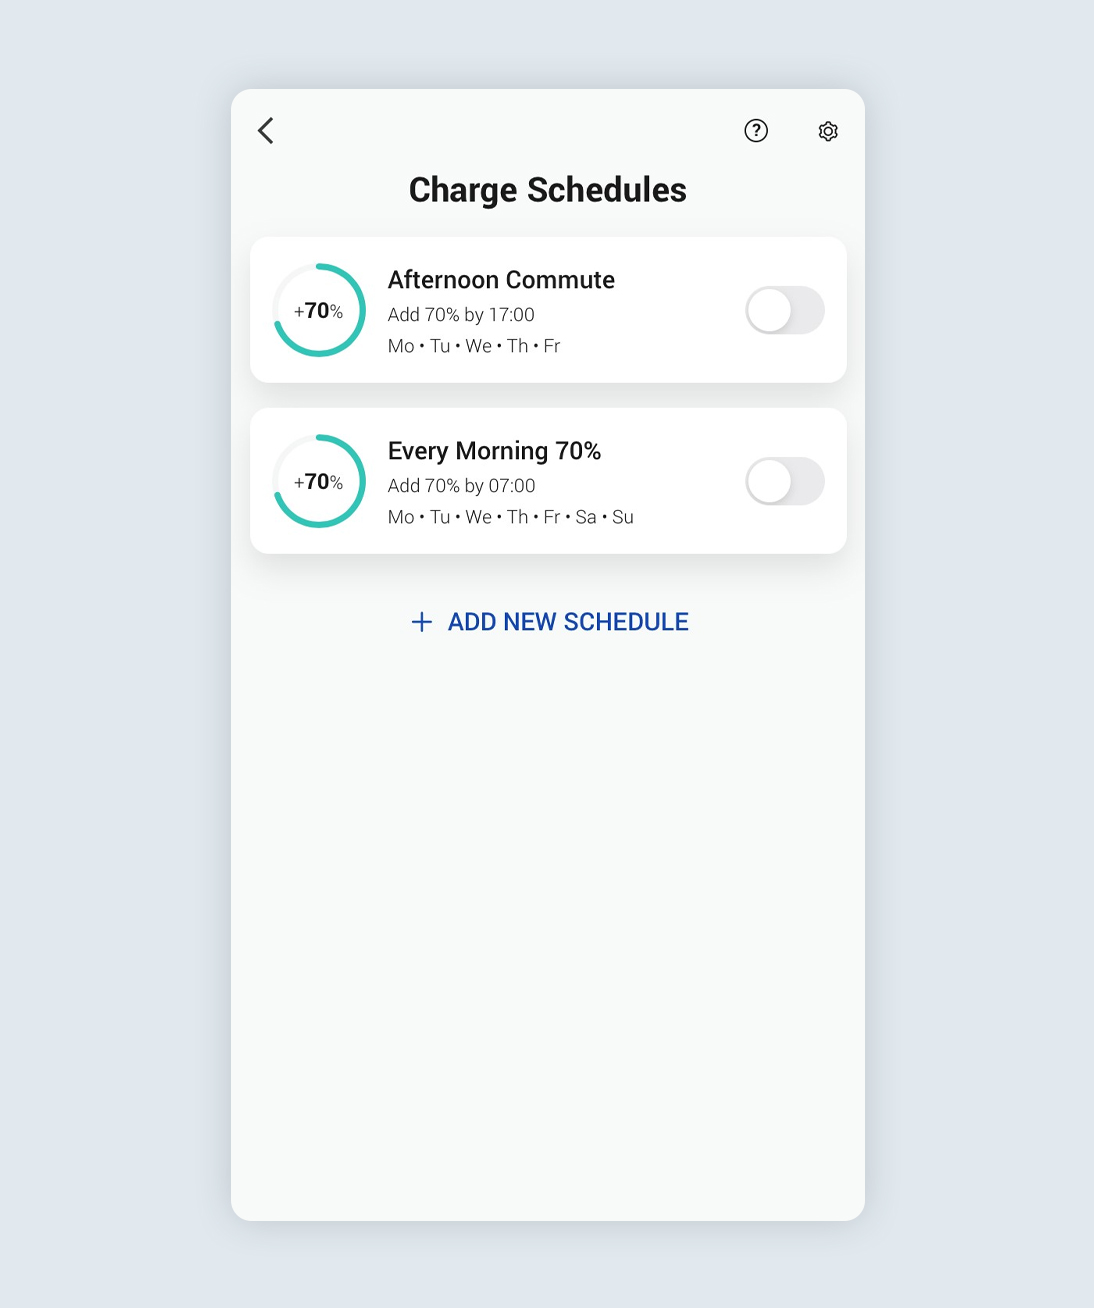 Charge schedules screen from the Ohme app